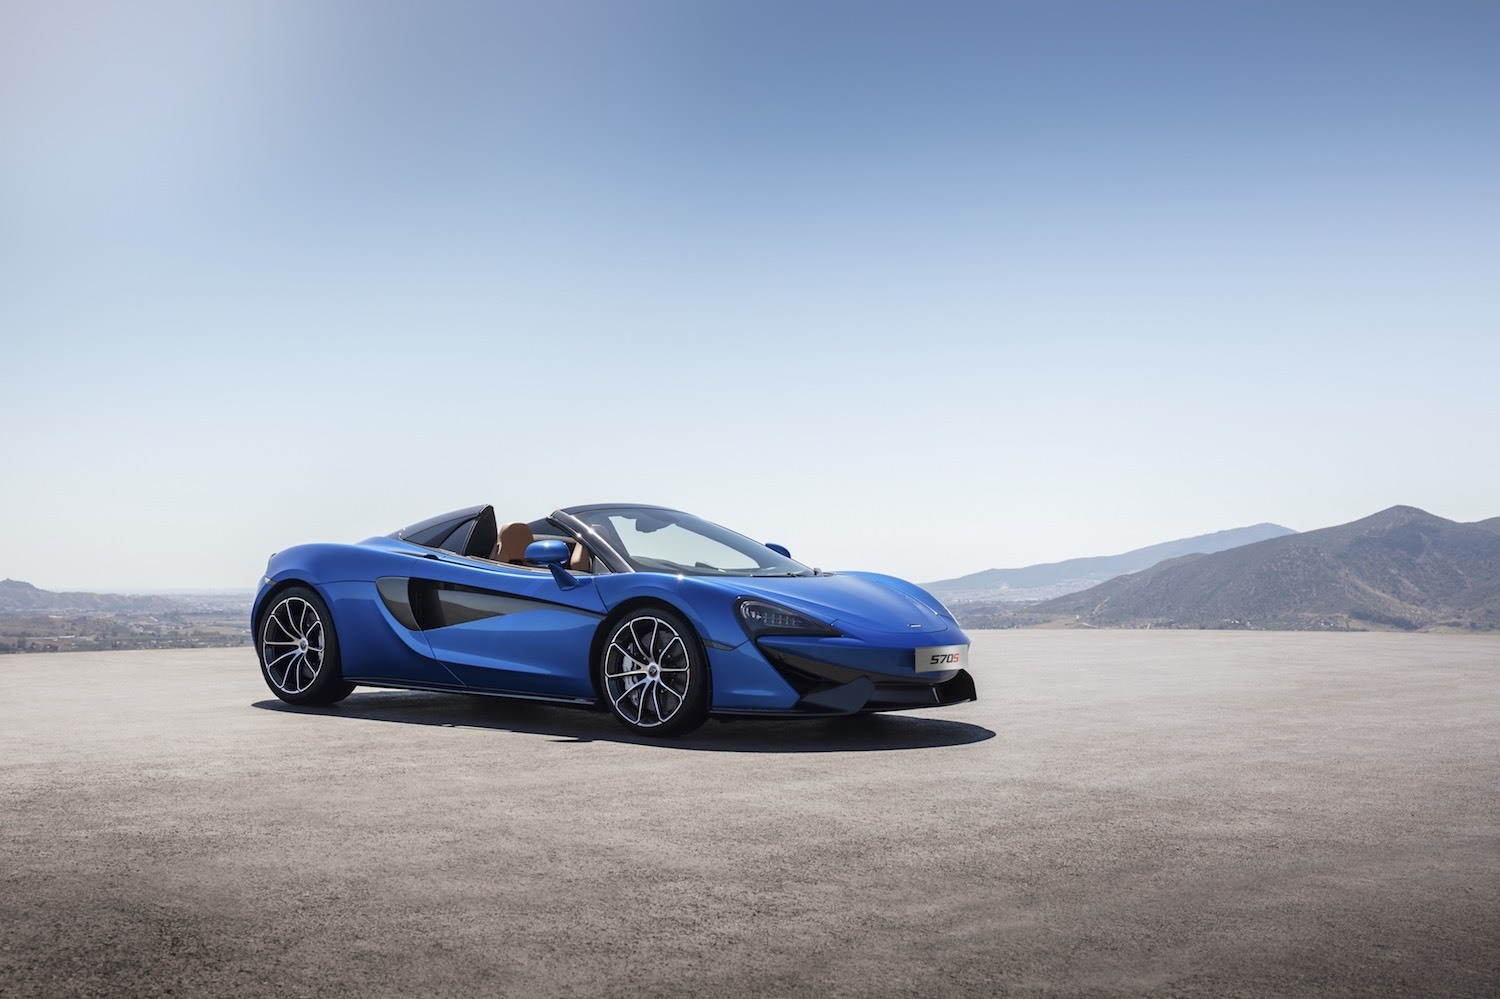 Neil Lyndon reviews the latest New McLaren 720S Spider for Drive 11